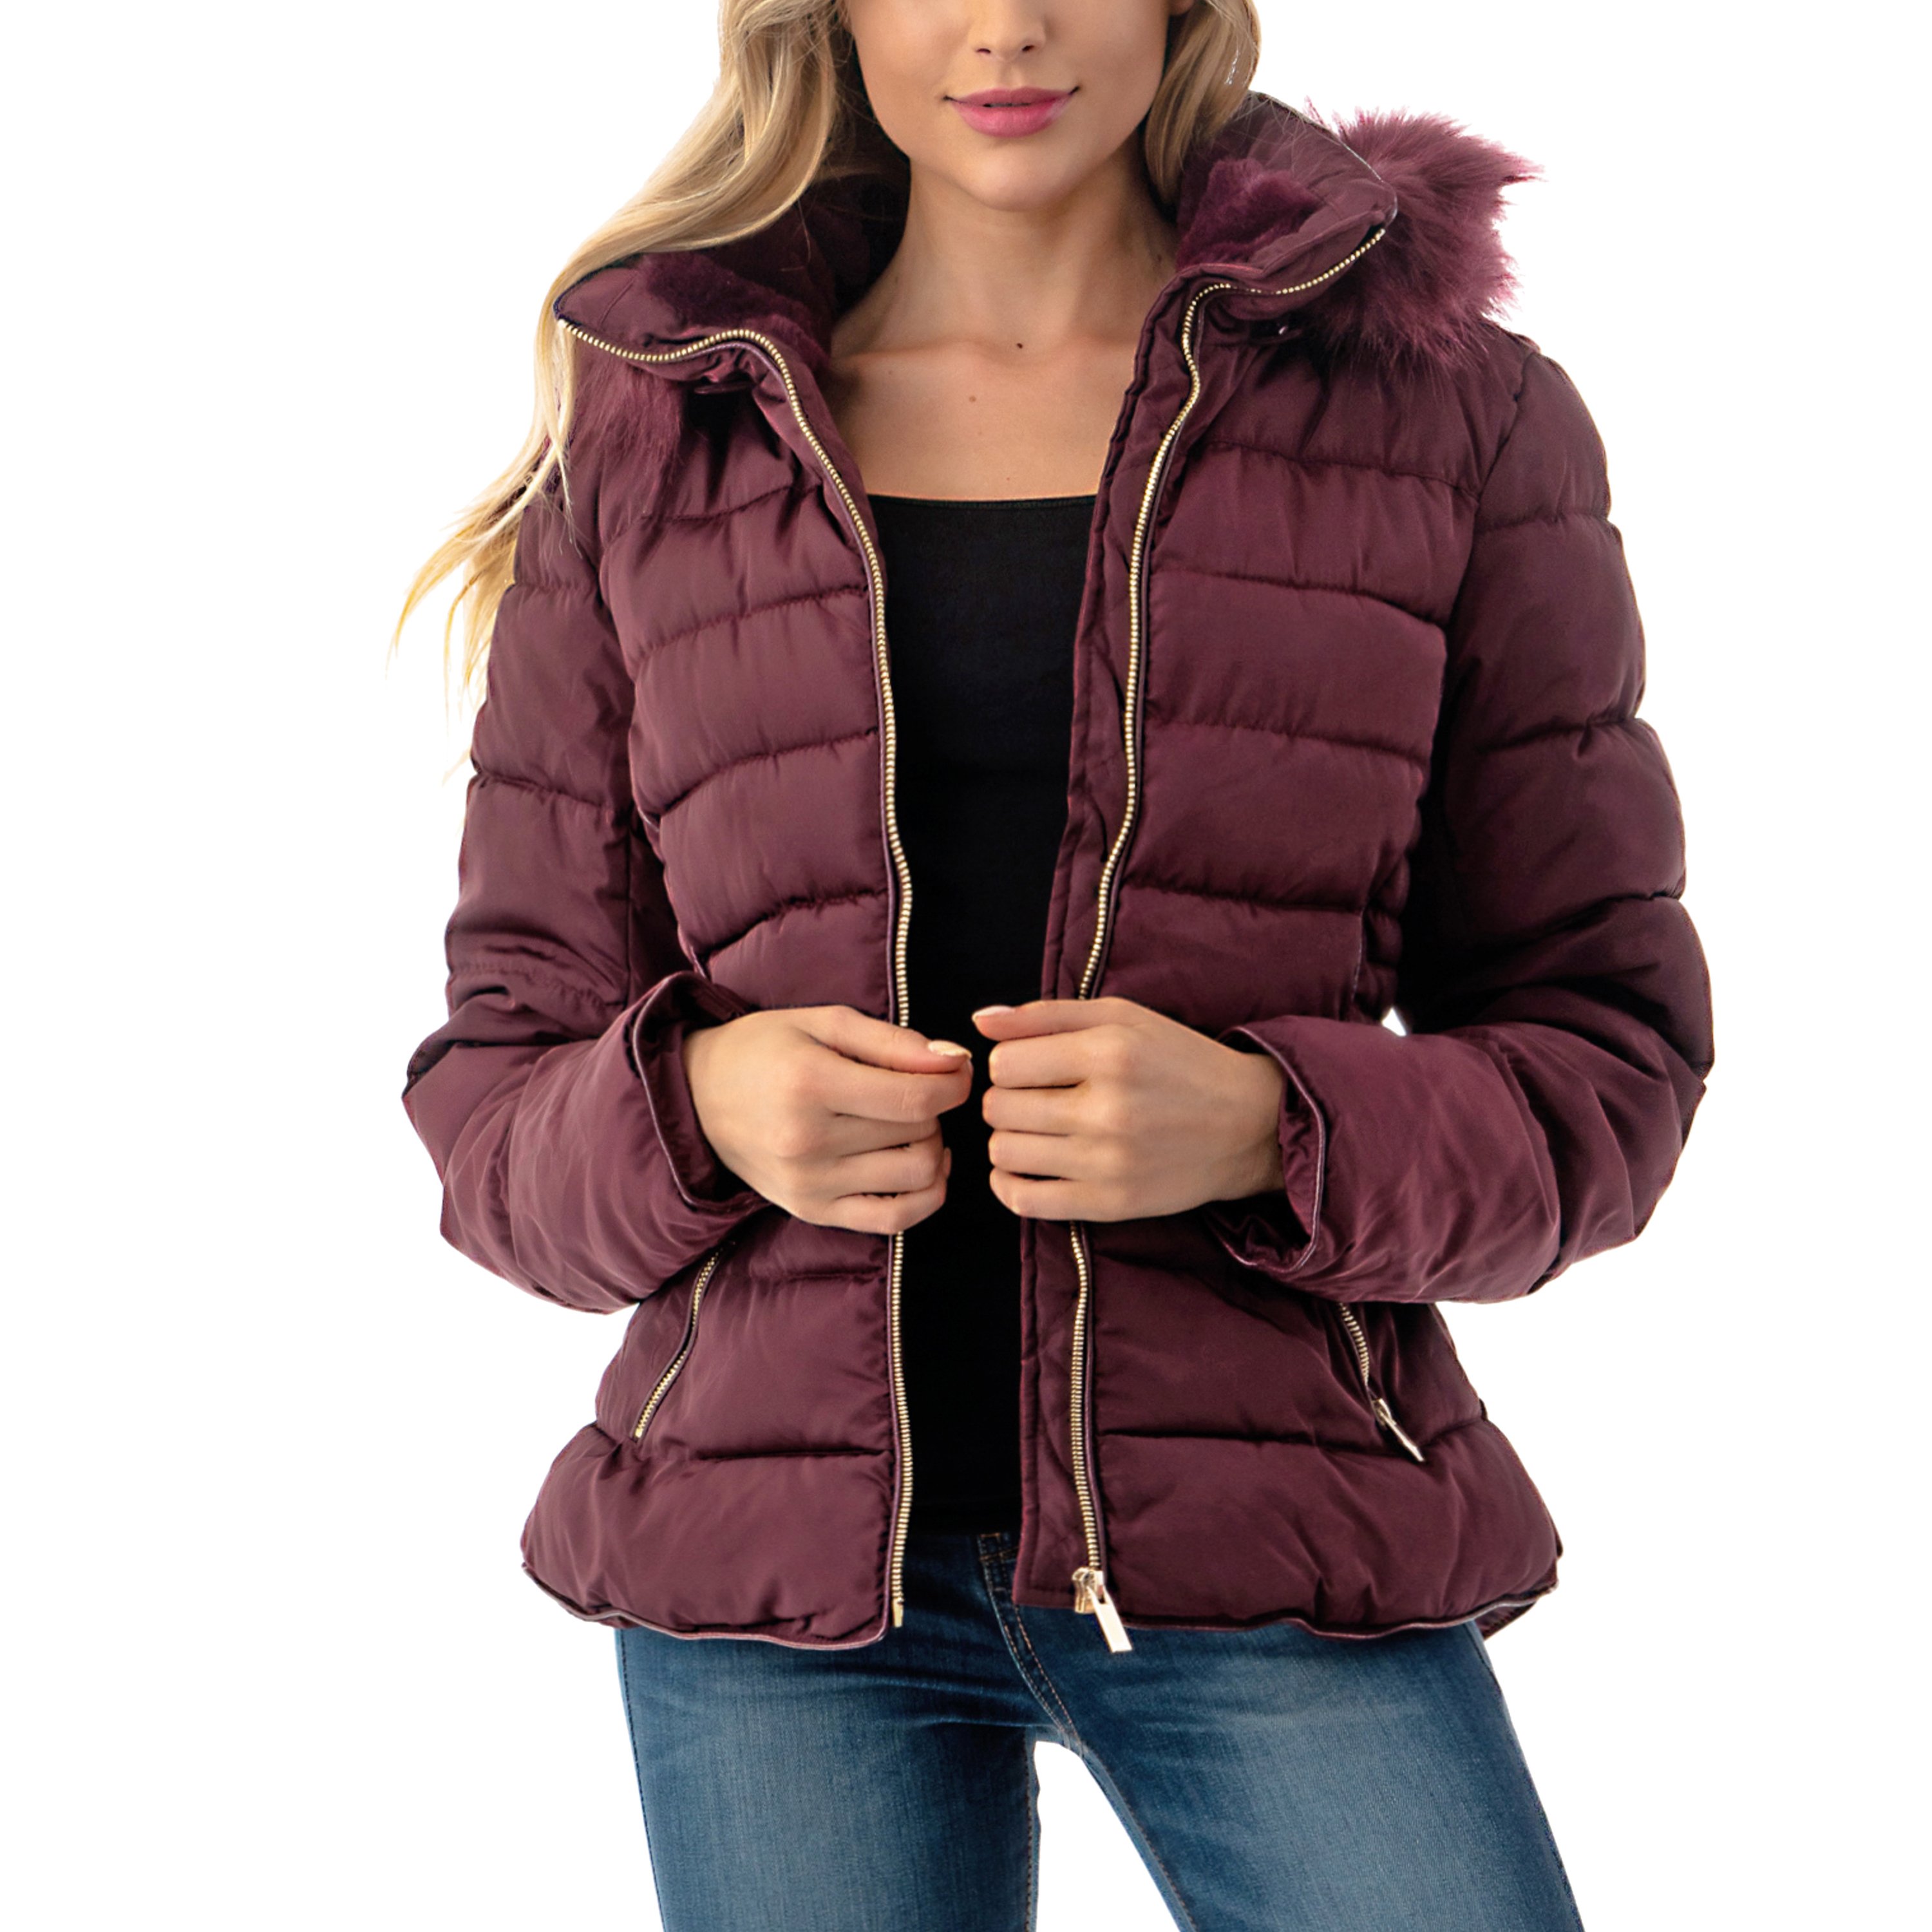 Fashionazzle Women's Short Puffer Coat with Removable Faux Fur Trim Hood Jacket - image 3 of 14